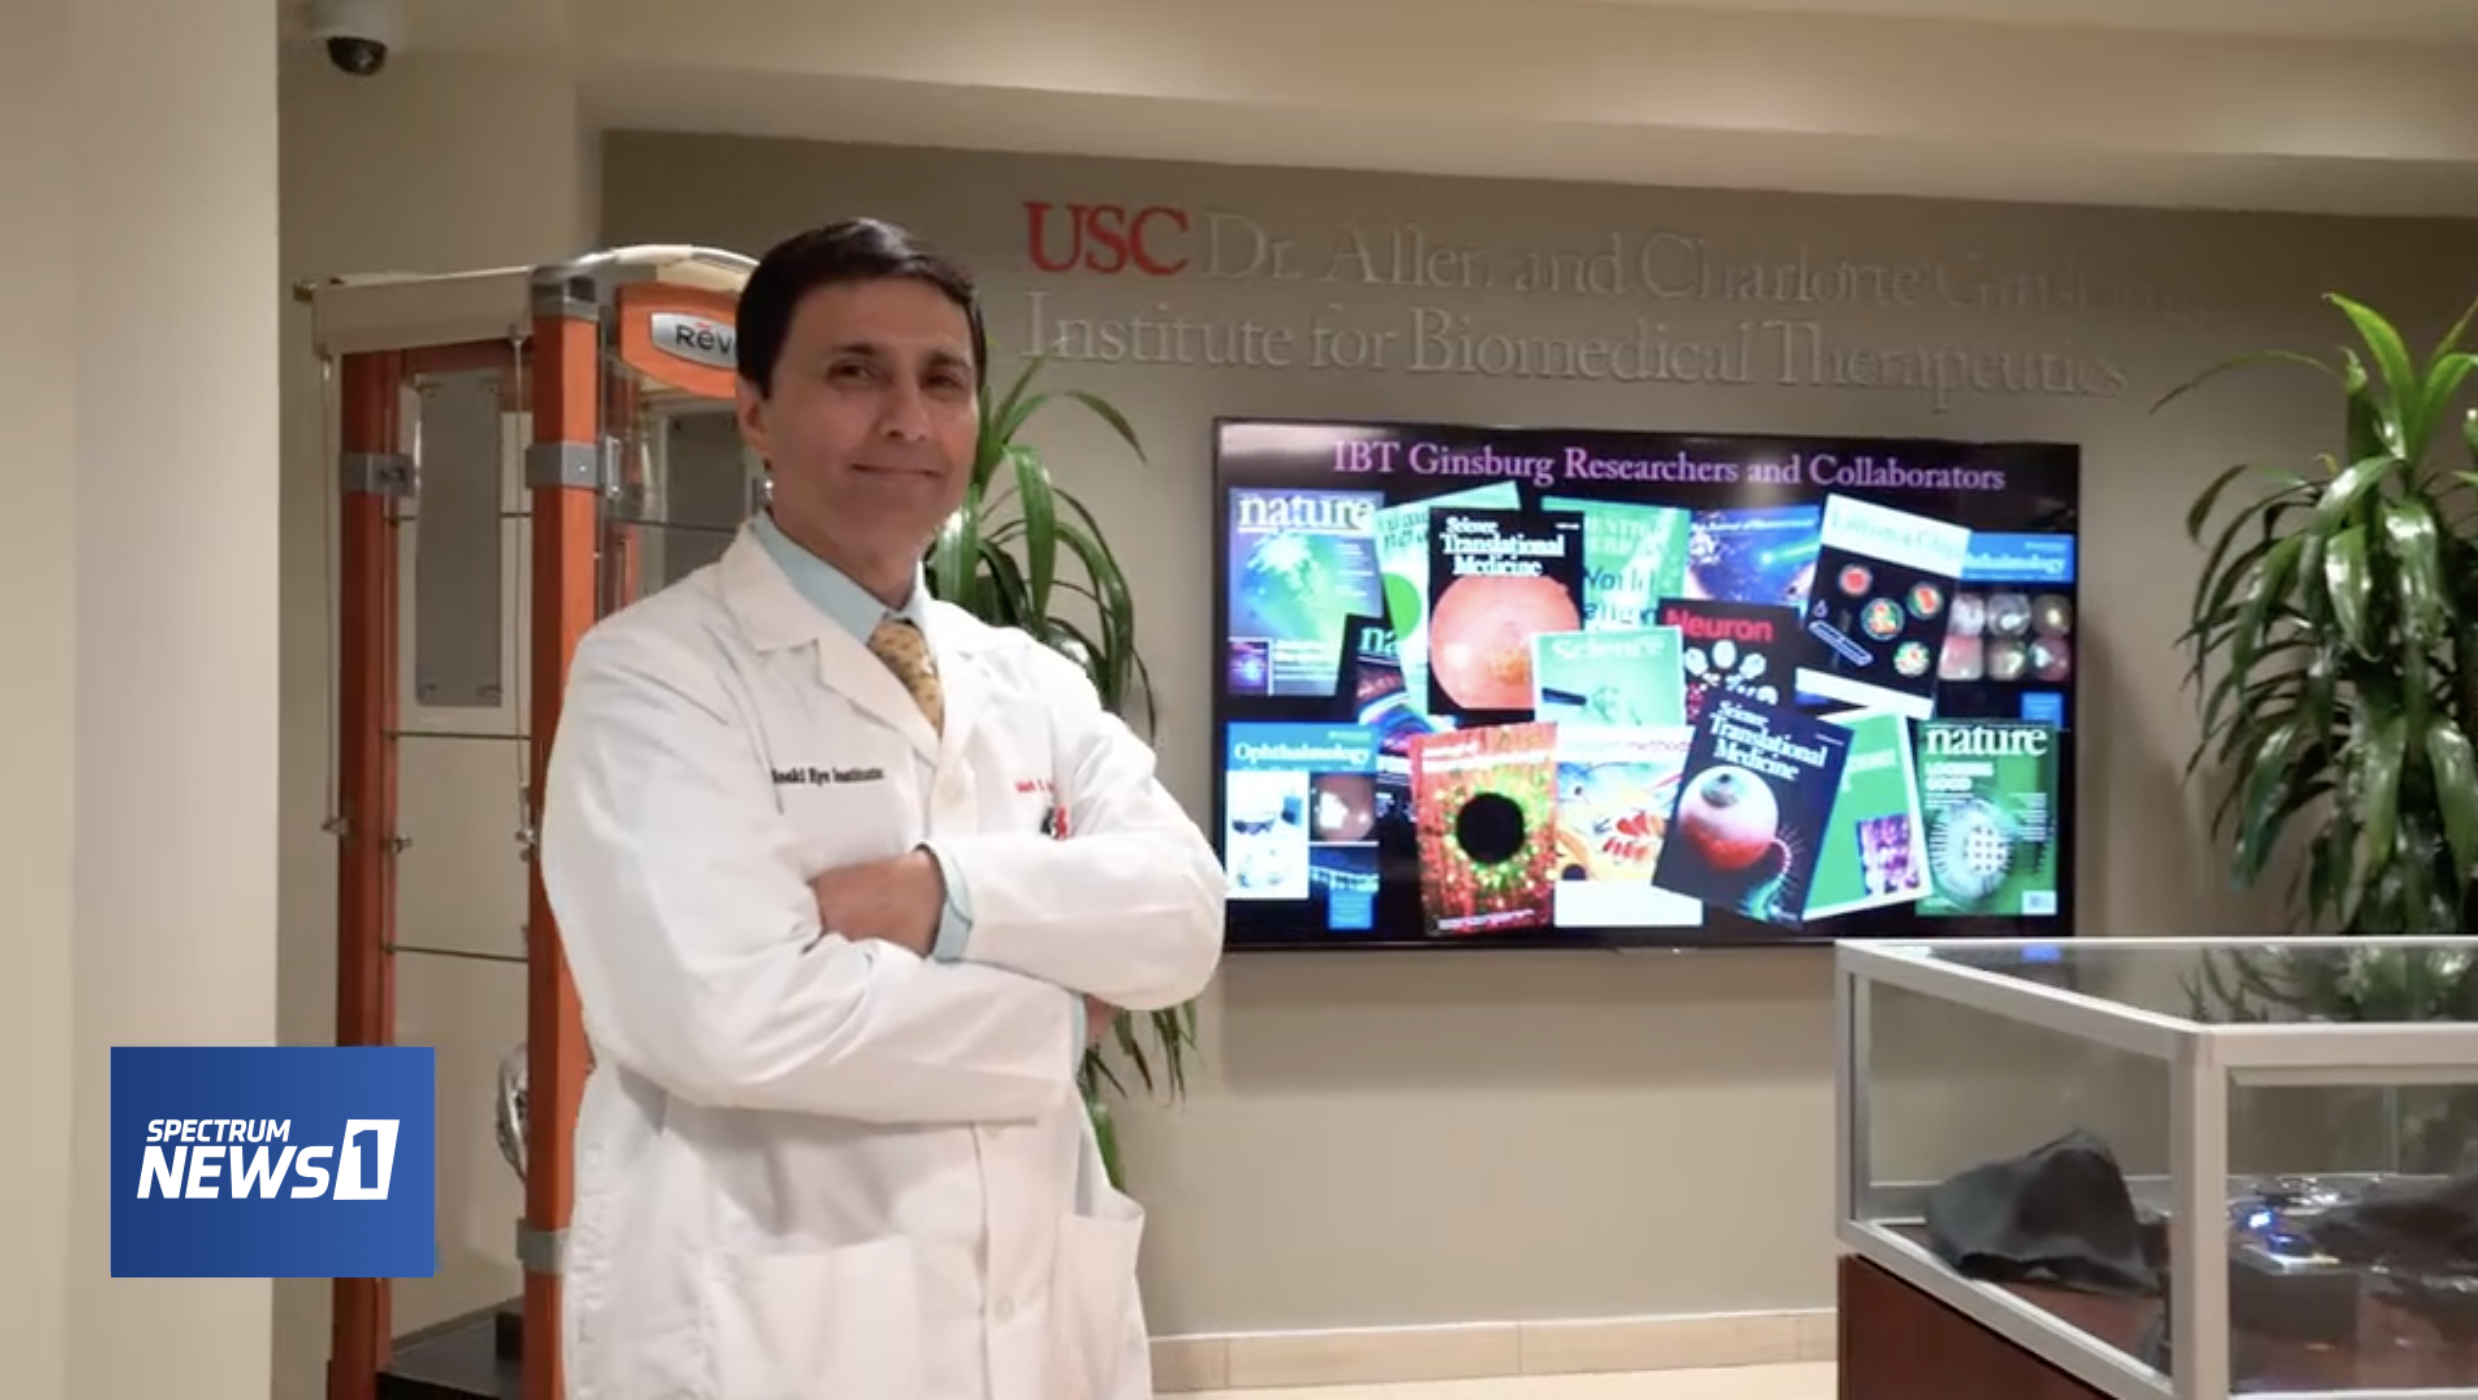 Mark Humayun, MD, PhD, discusses his scientific achievements and inspiration to cure blindness on LA Stories with Giselle Fernandez (Image: Spectrum News).